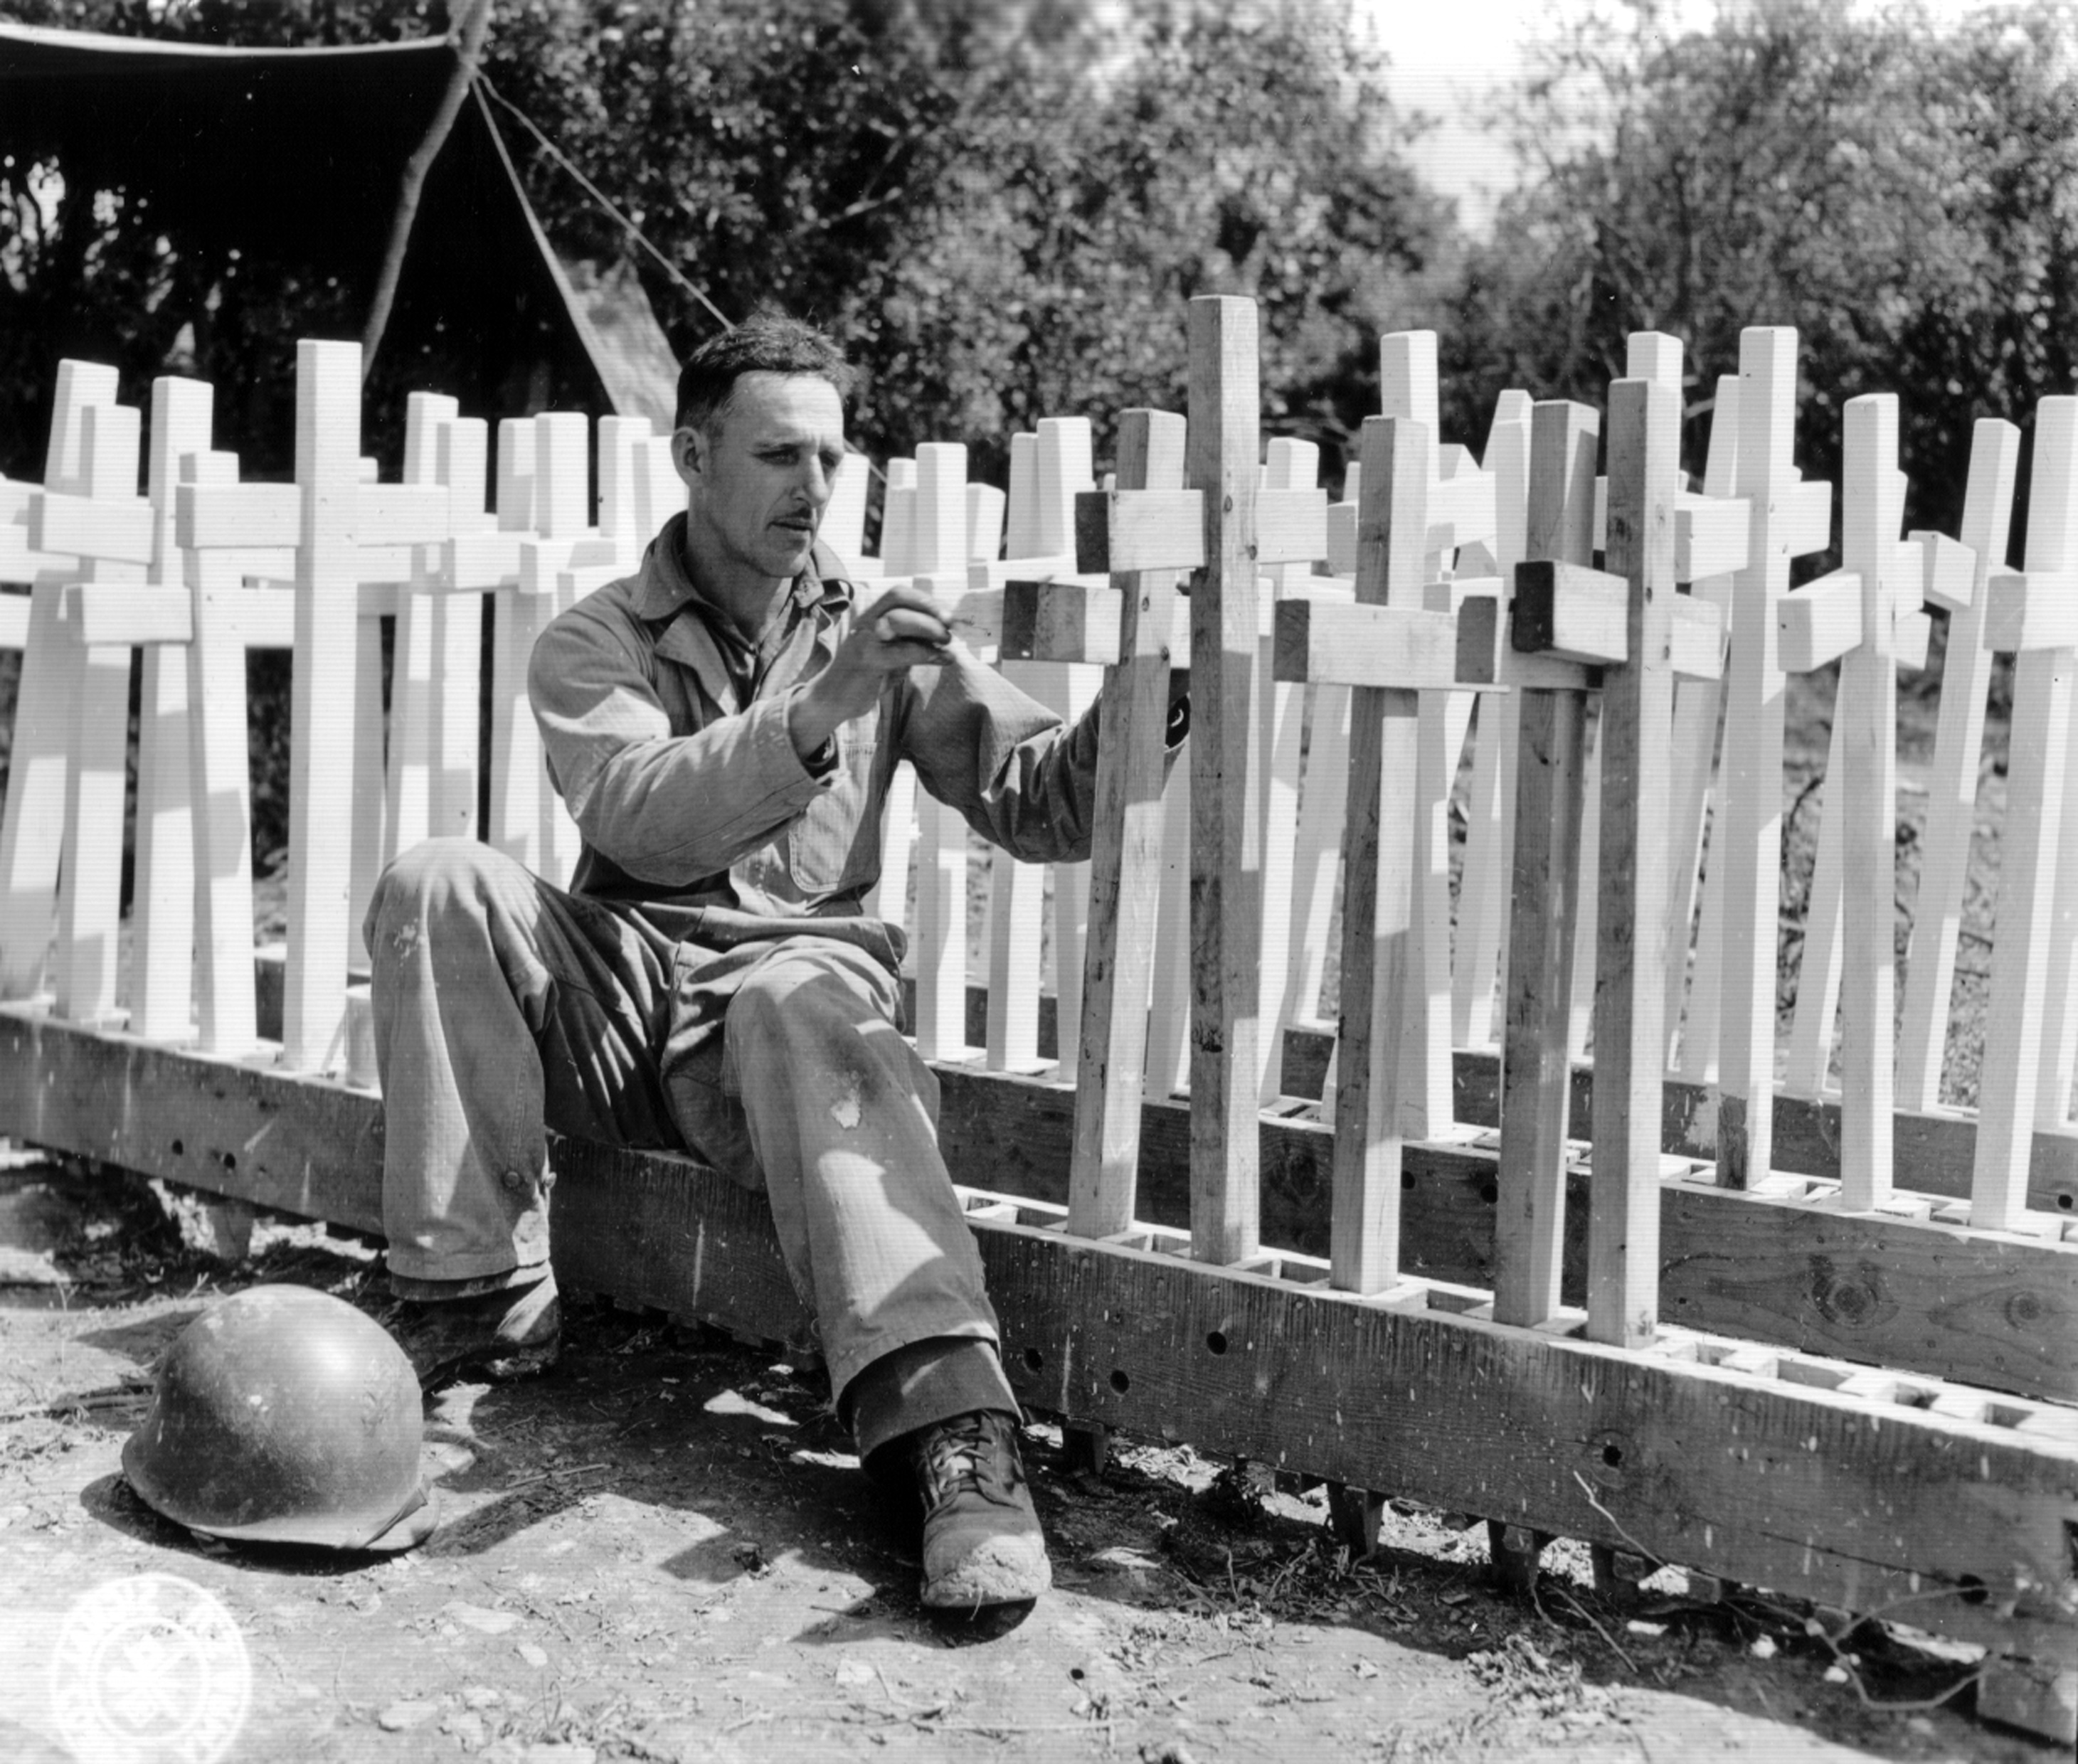 Historic photo shows soldier preparing wooden crosses.